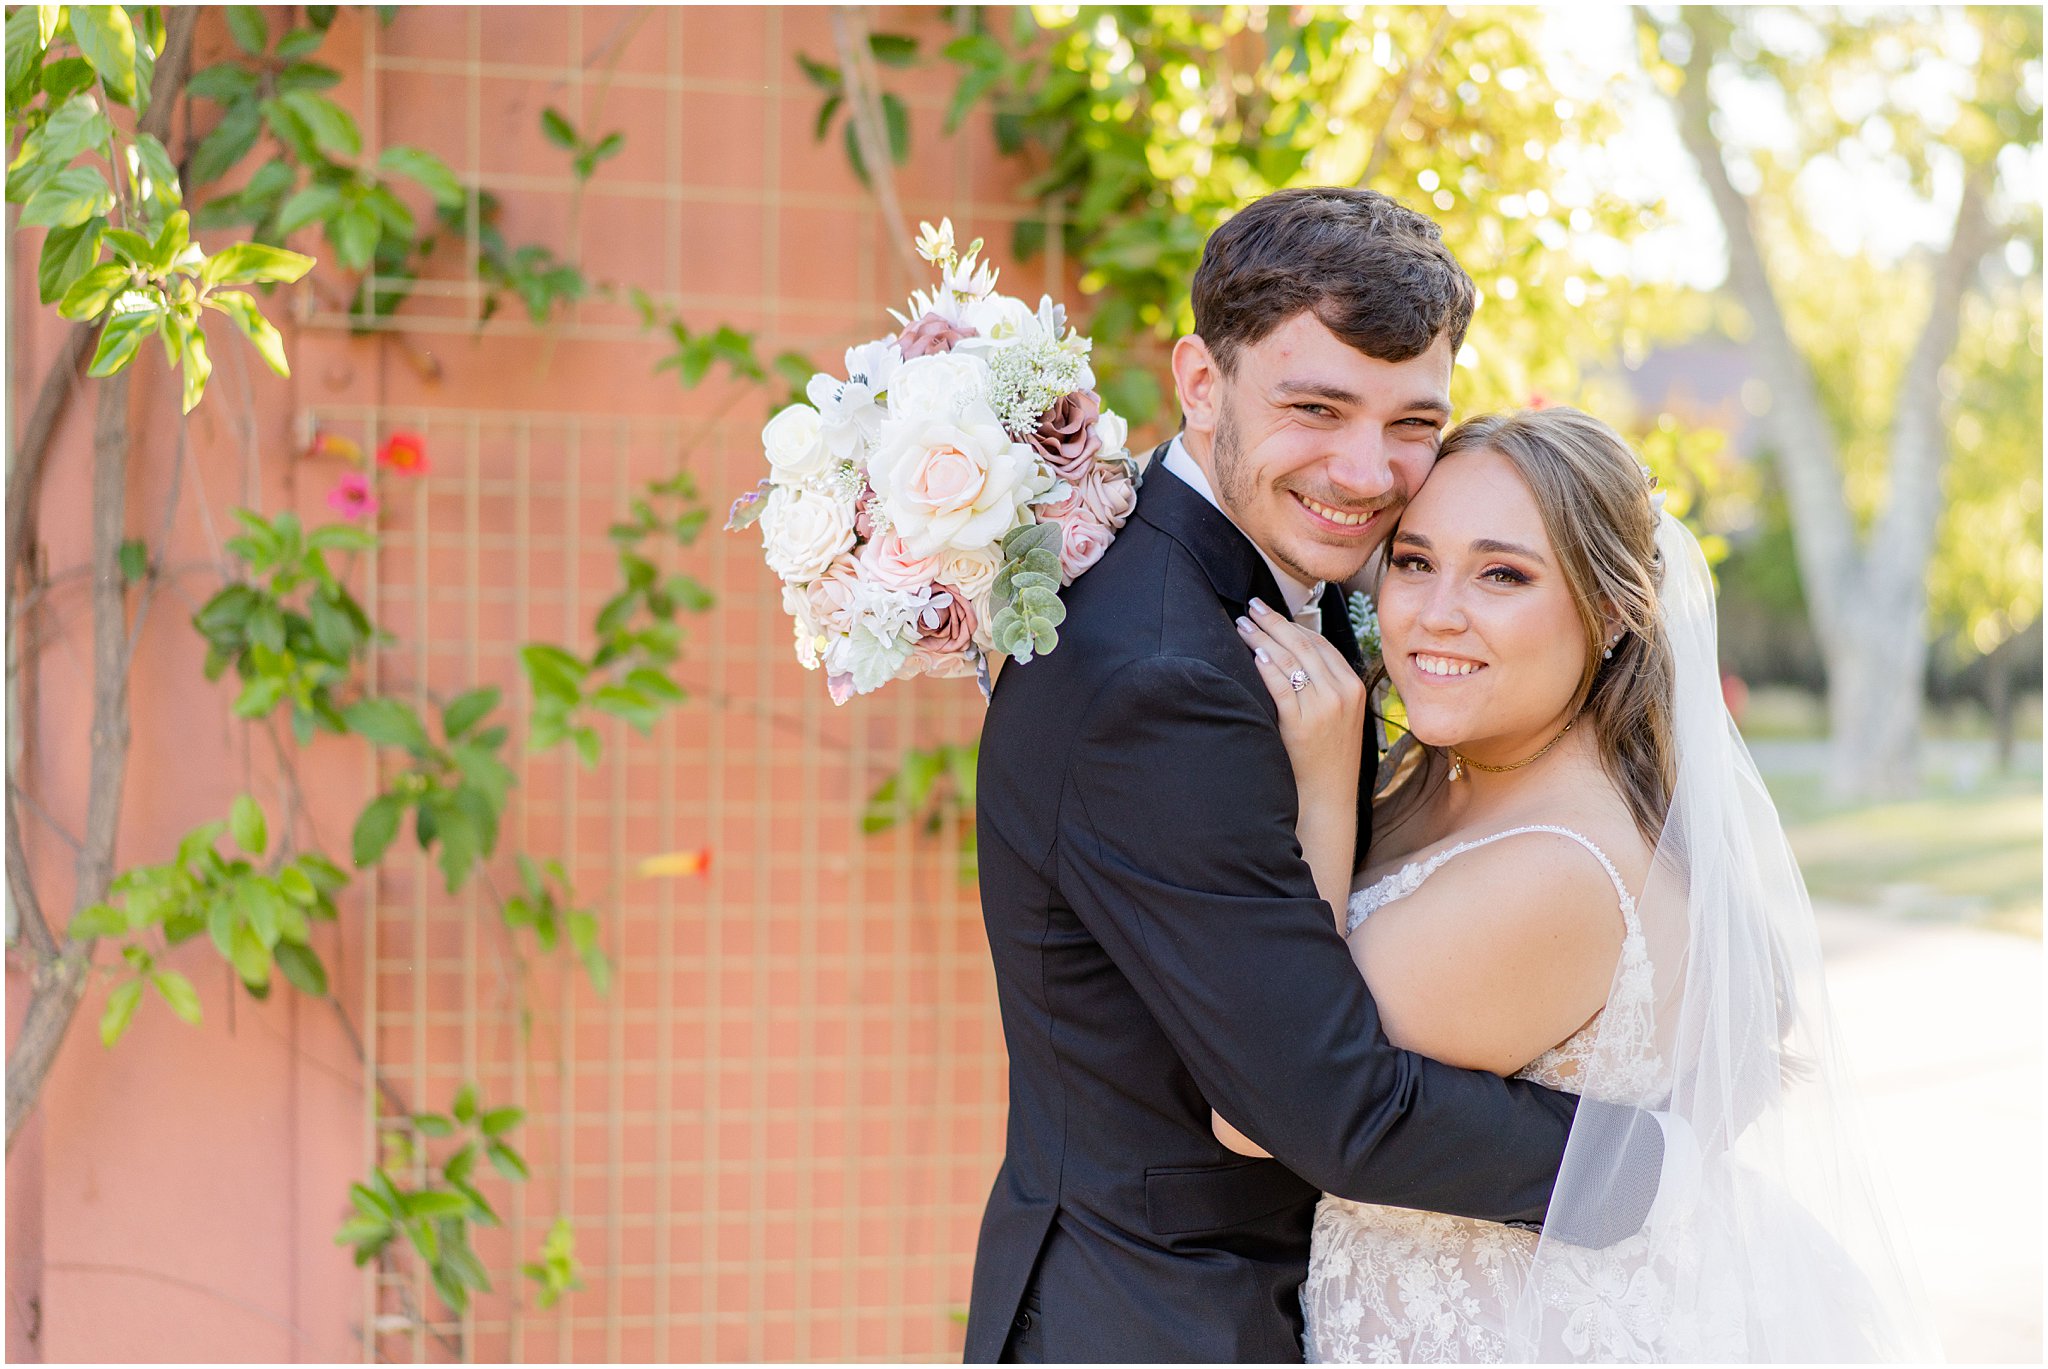 newlyweds embrace smiling at the camera